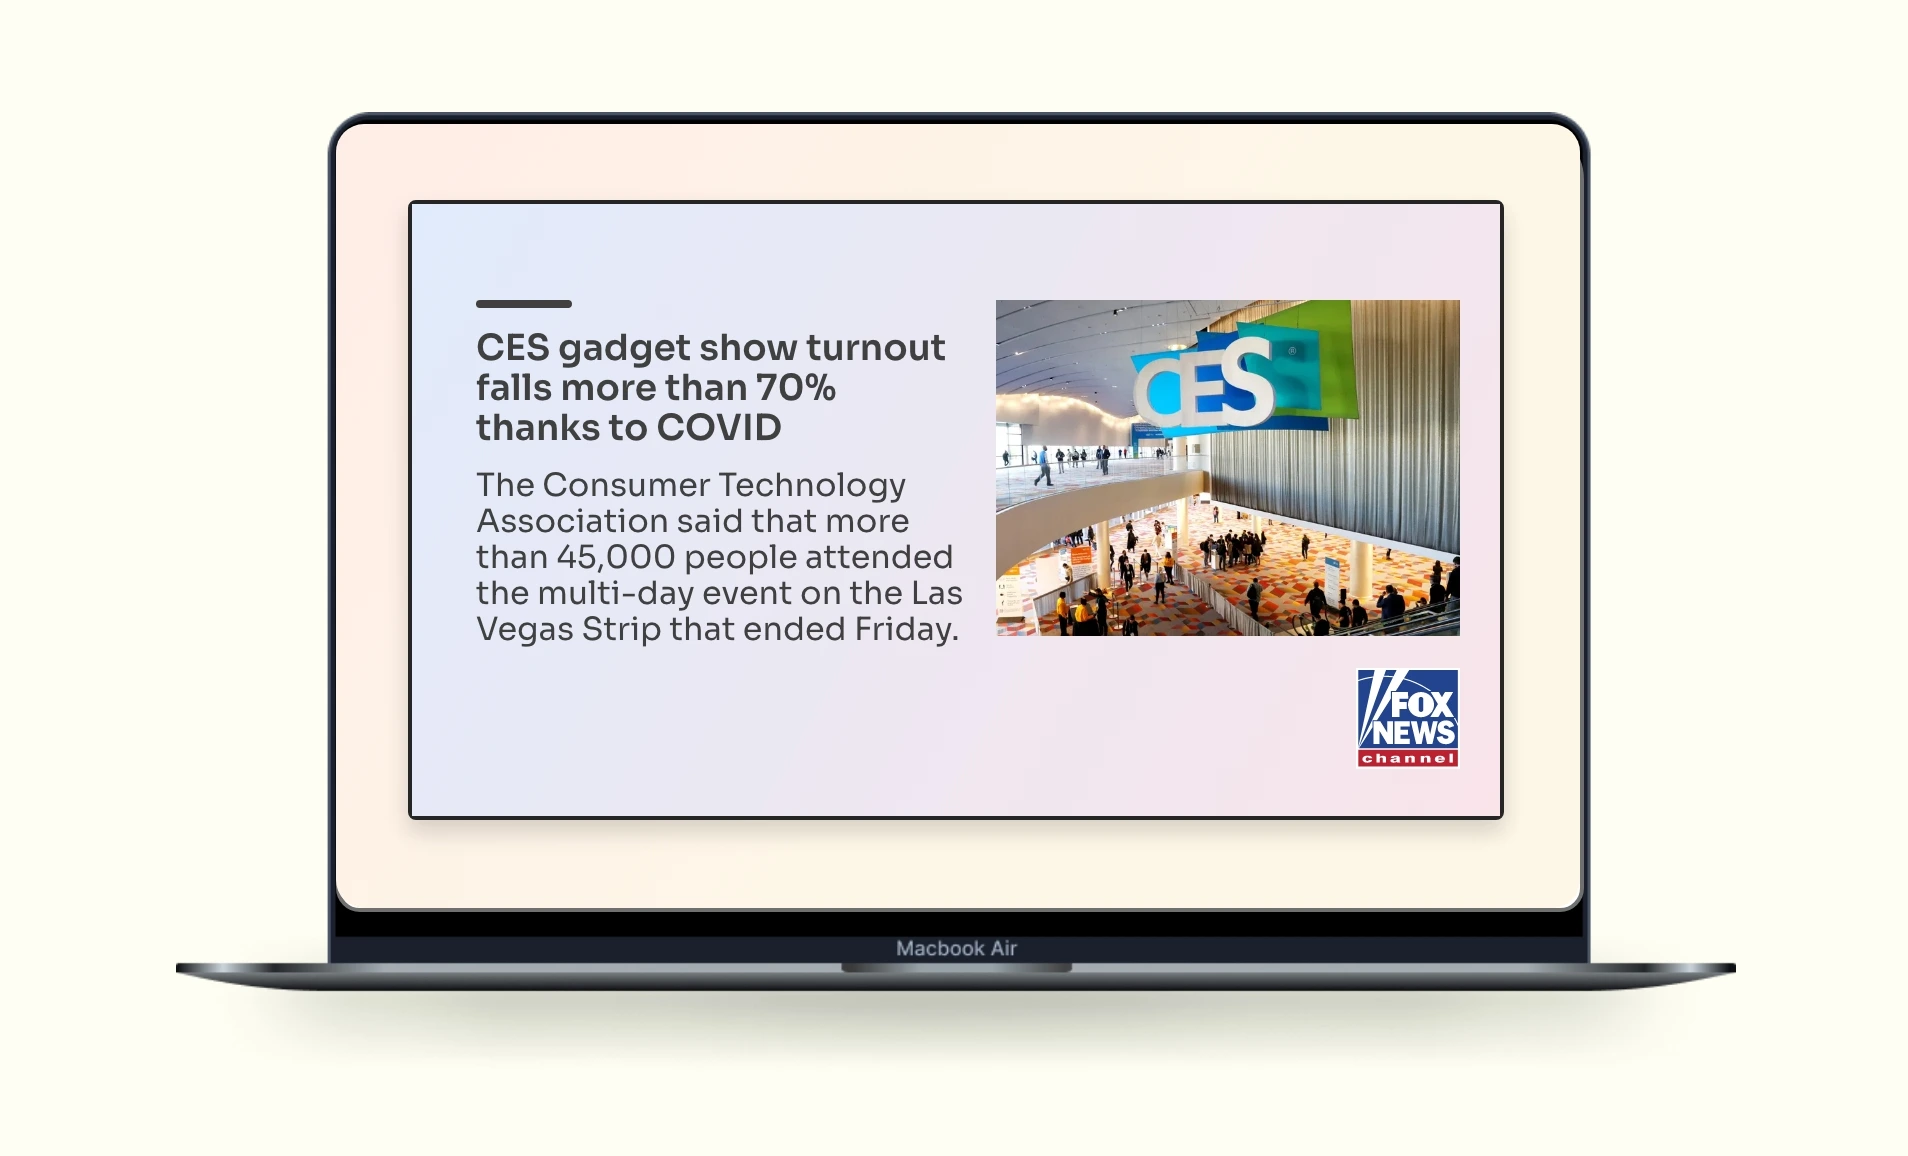 Fox News app preview screen to check how will the app content look in the digital signage screen before publishing